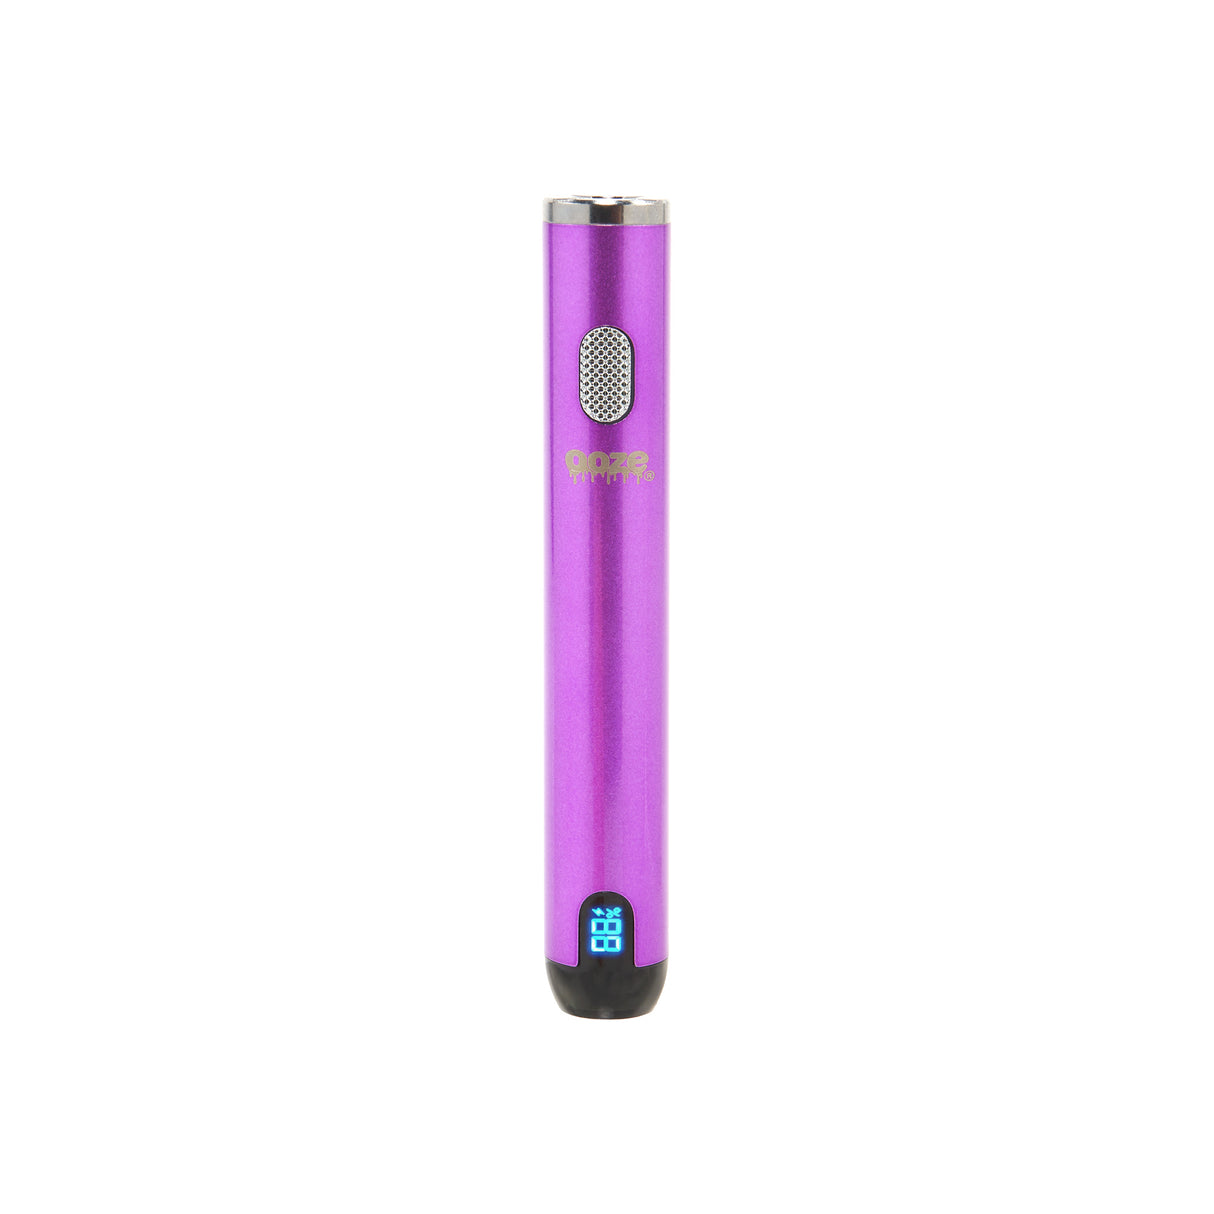 The ultra purple Ooze Smart Battery is upright and turned on without the charger